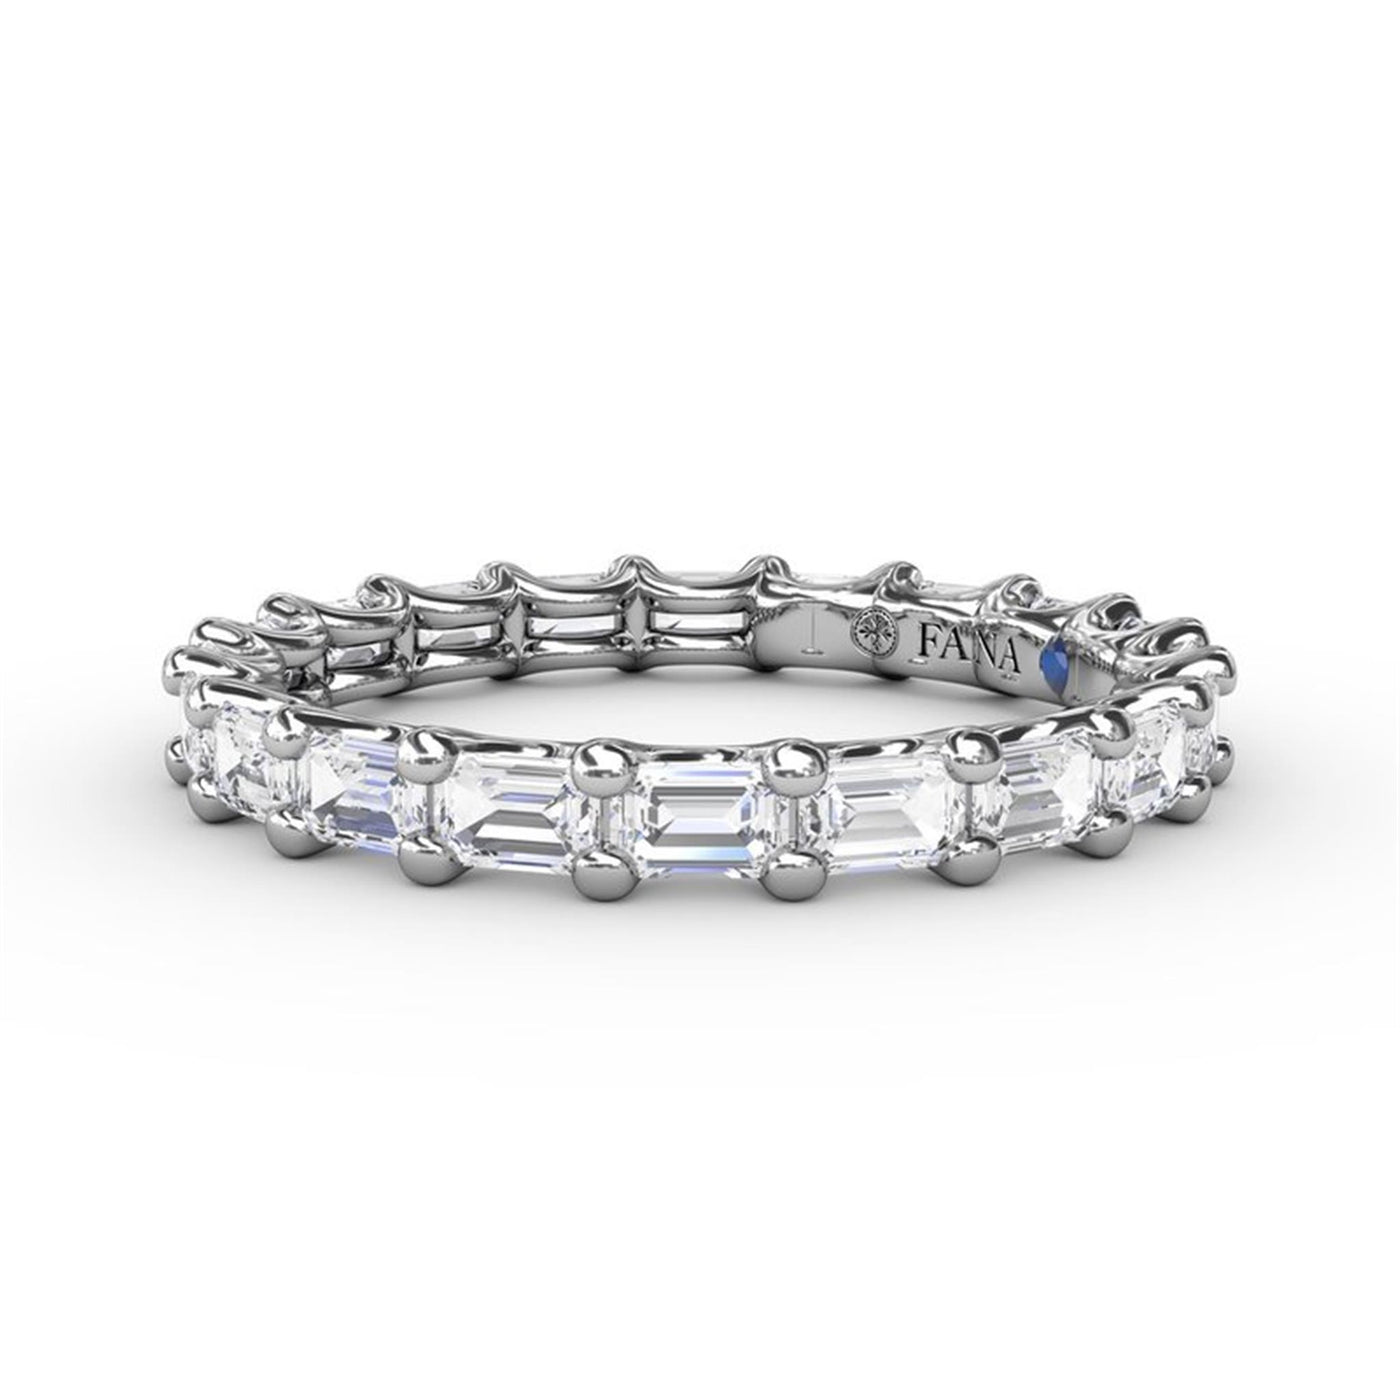 14K White Gold 1.59ctw Diamond Eternity Band 
Featuring a Polished Finish